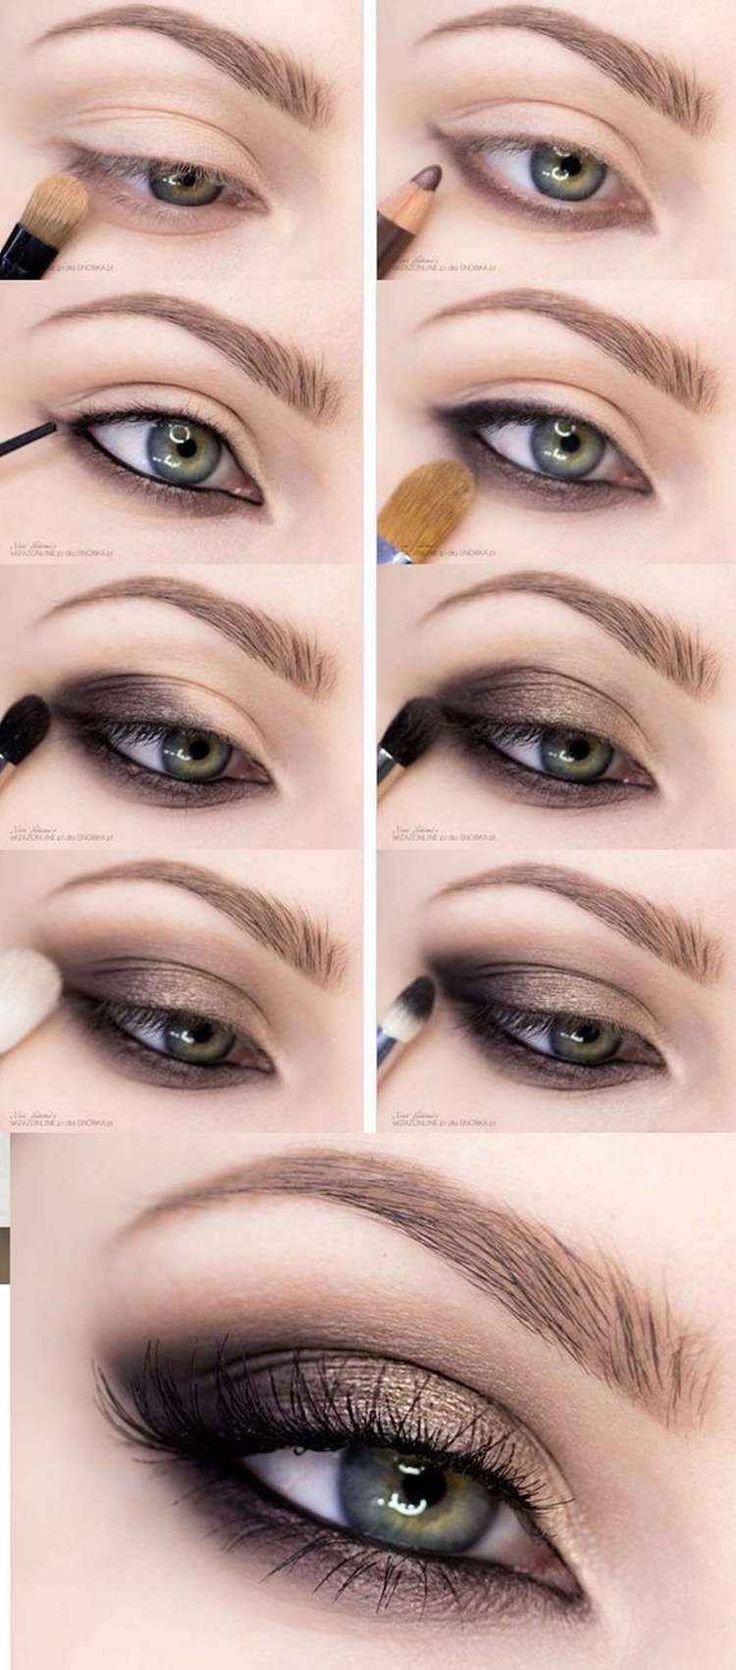 Top-conseils-pour-reussir-son-maquillage-smoky-eyes.jpg